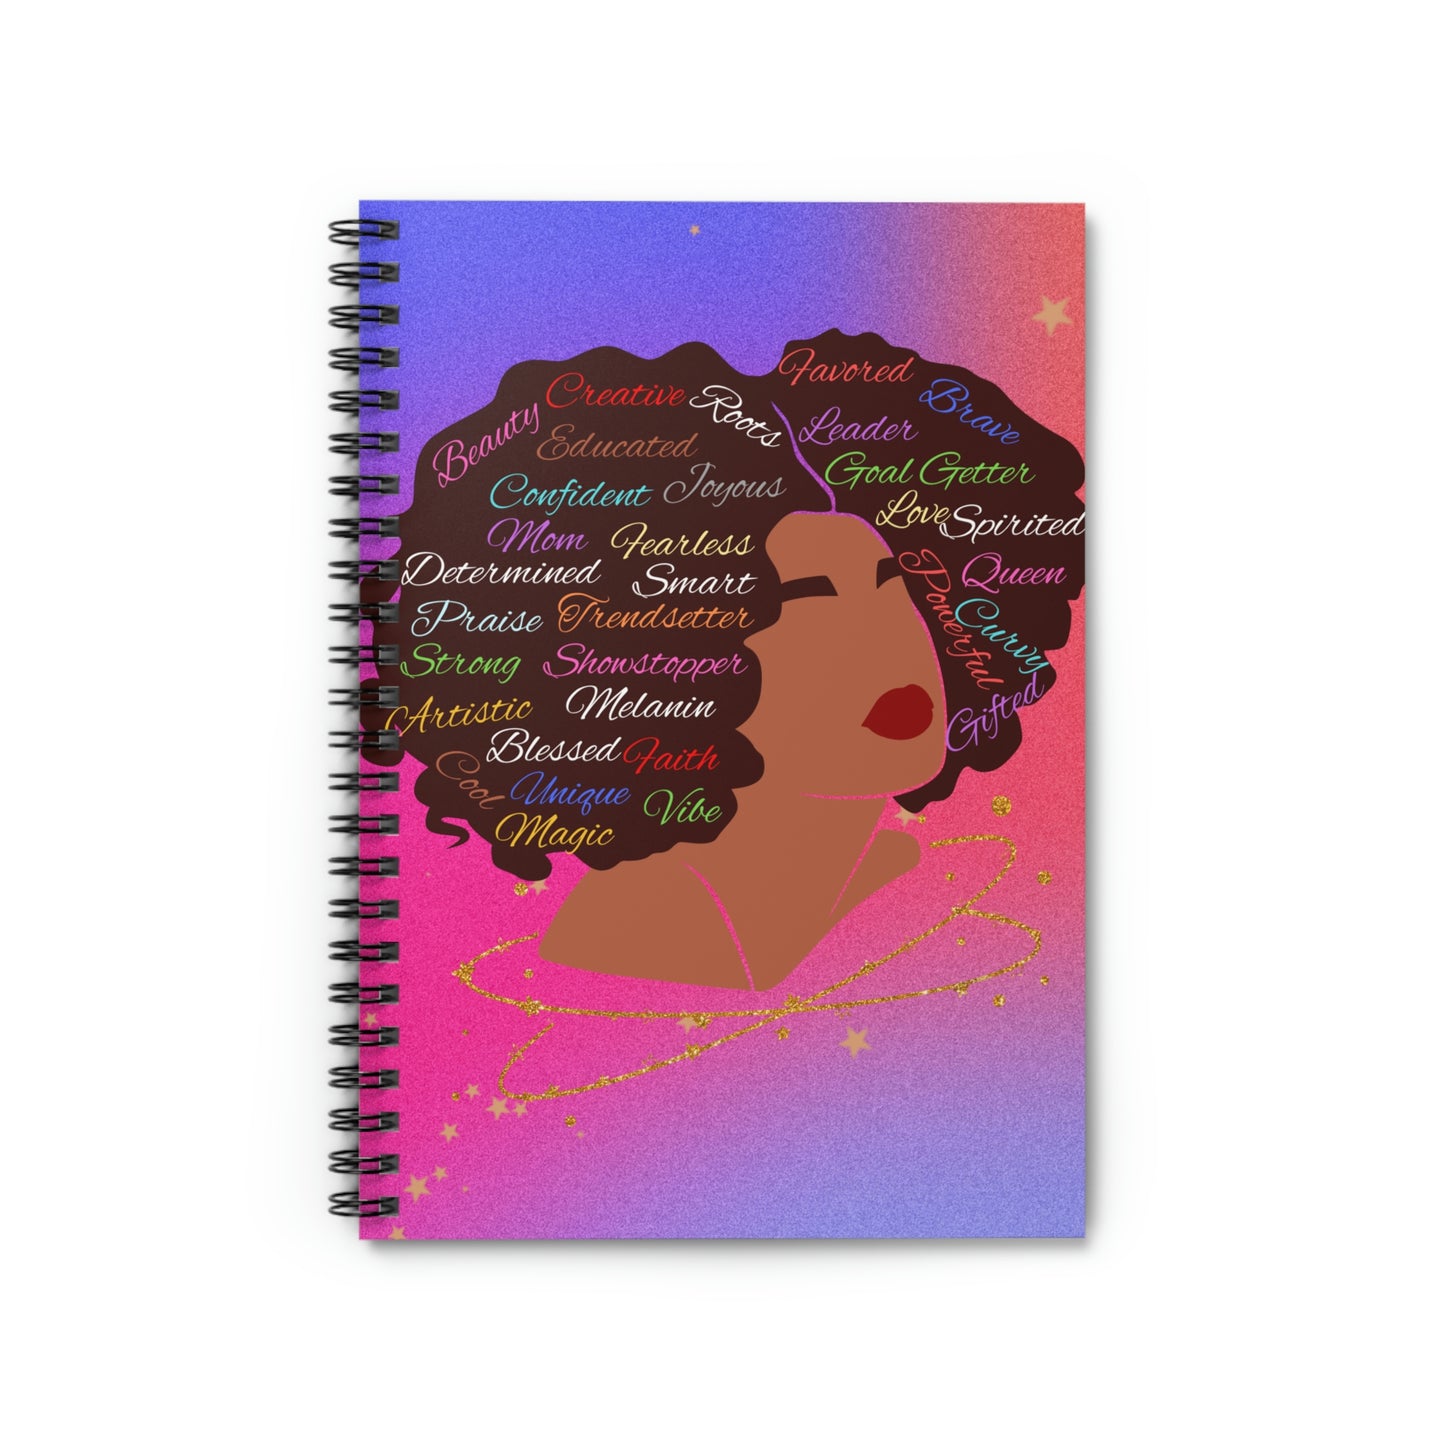 Everything We Are Spiral Notebook/Journal